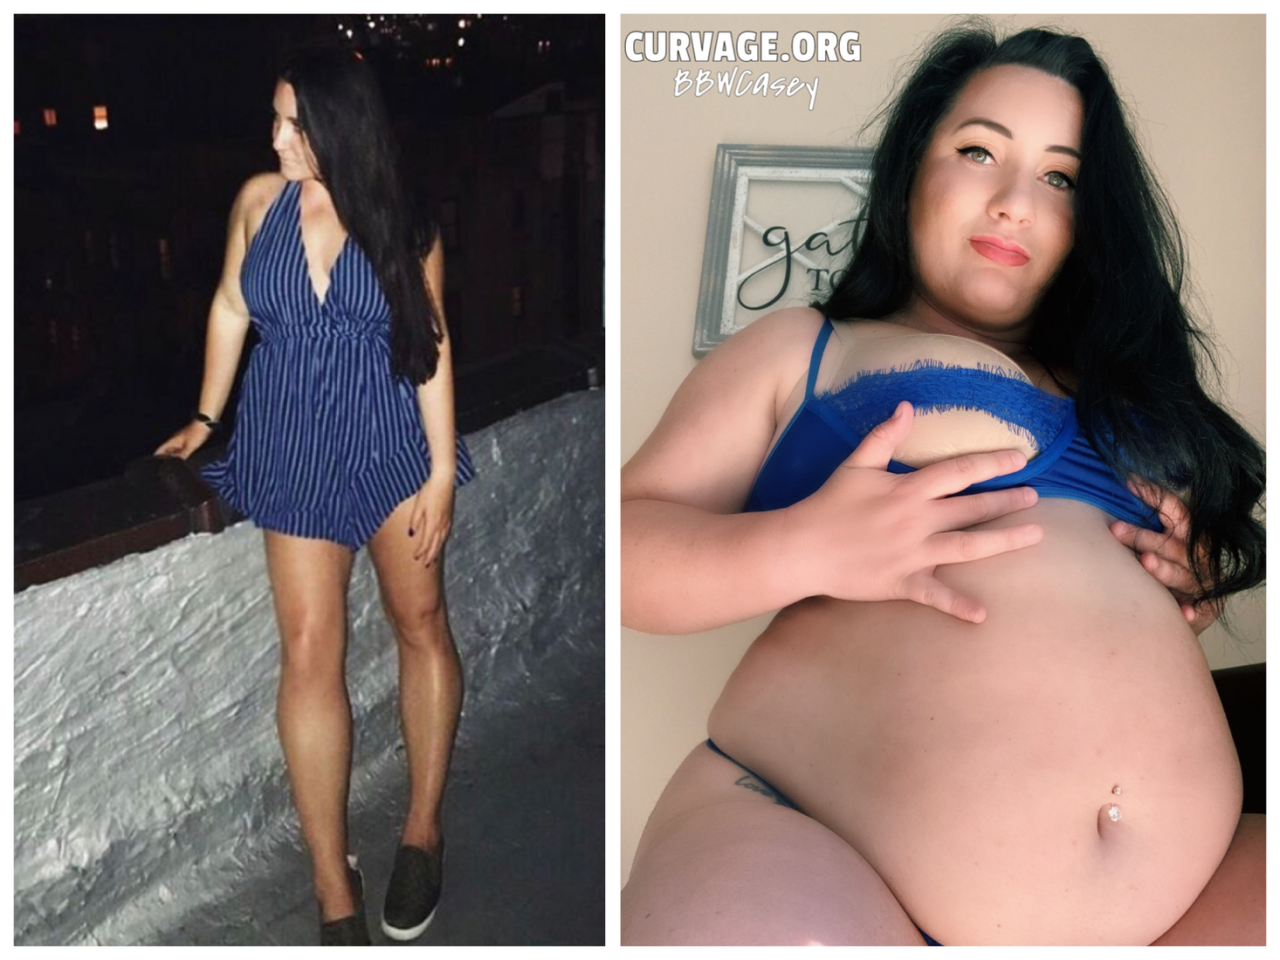 stuffed-bellies-always:Bbw Casey from petite to cow